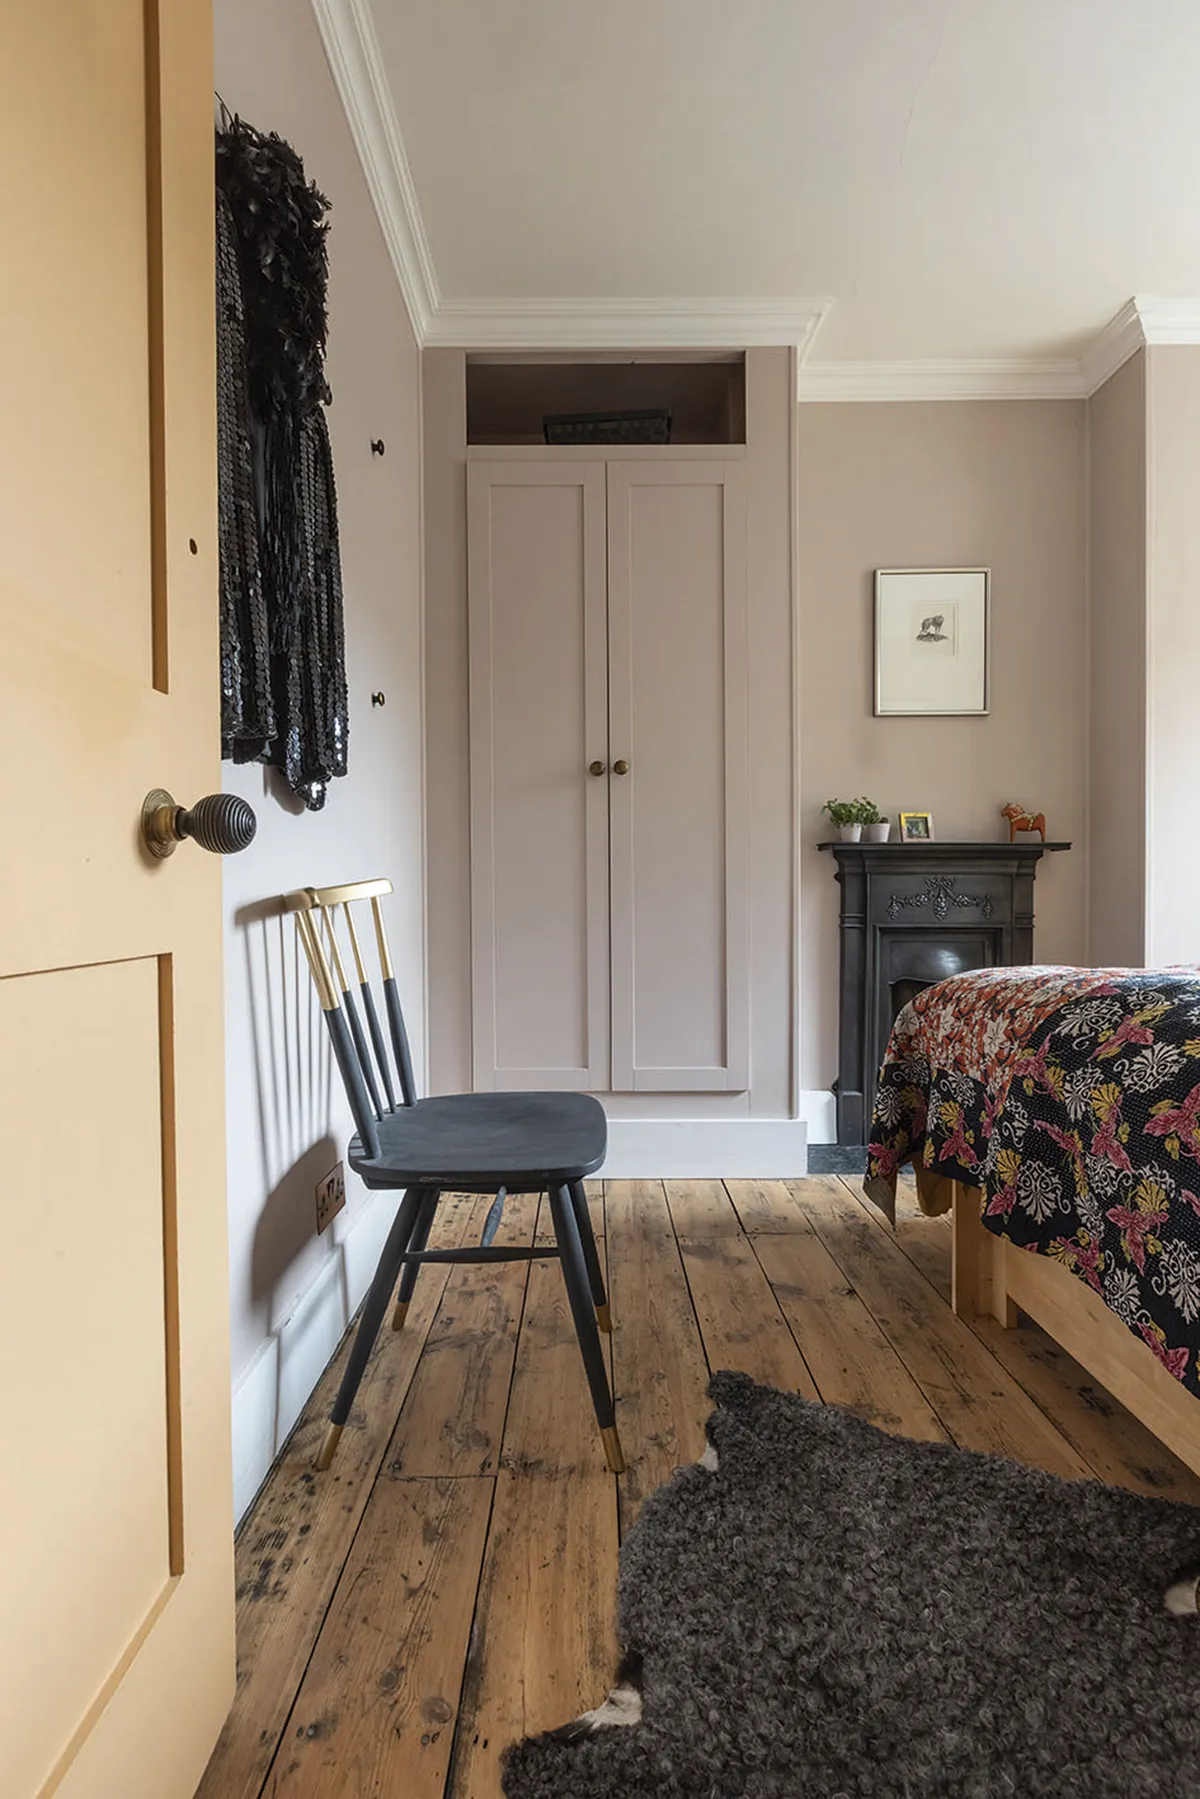 In the guest room, a colour scheme of mauve, black and grey draws the eye to the Victorian, cast iron fireplace. Carey and Johan designed the wardrobes themselves using IKEA doors, as in the main bedroom